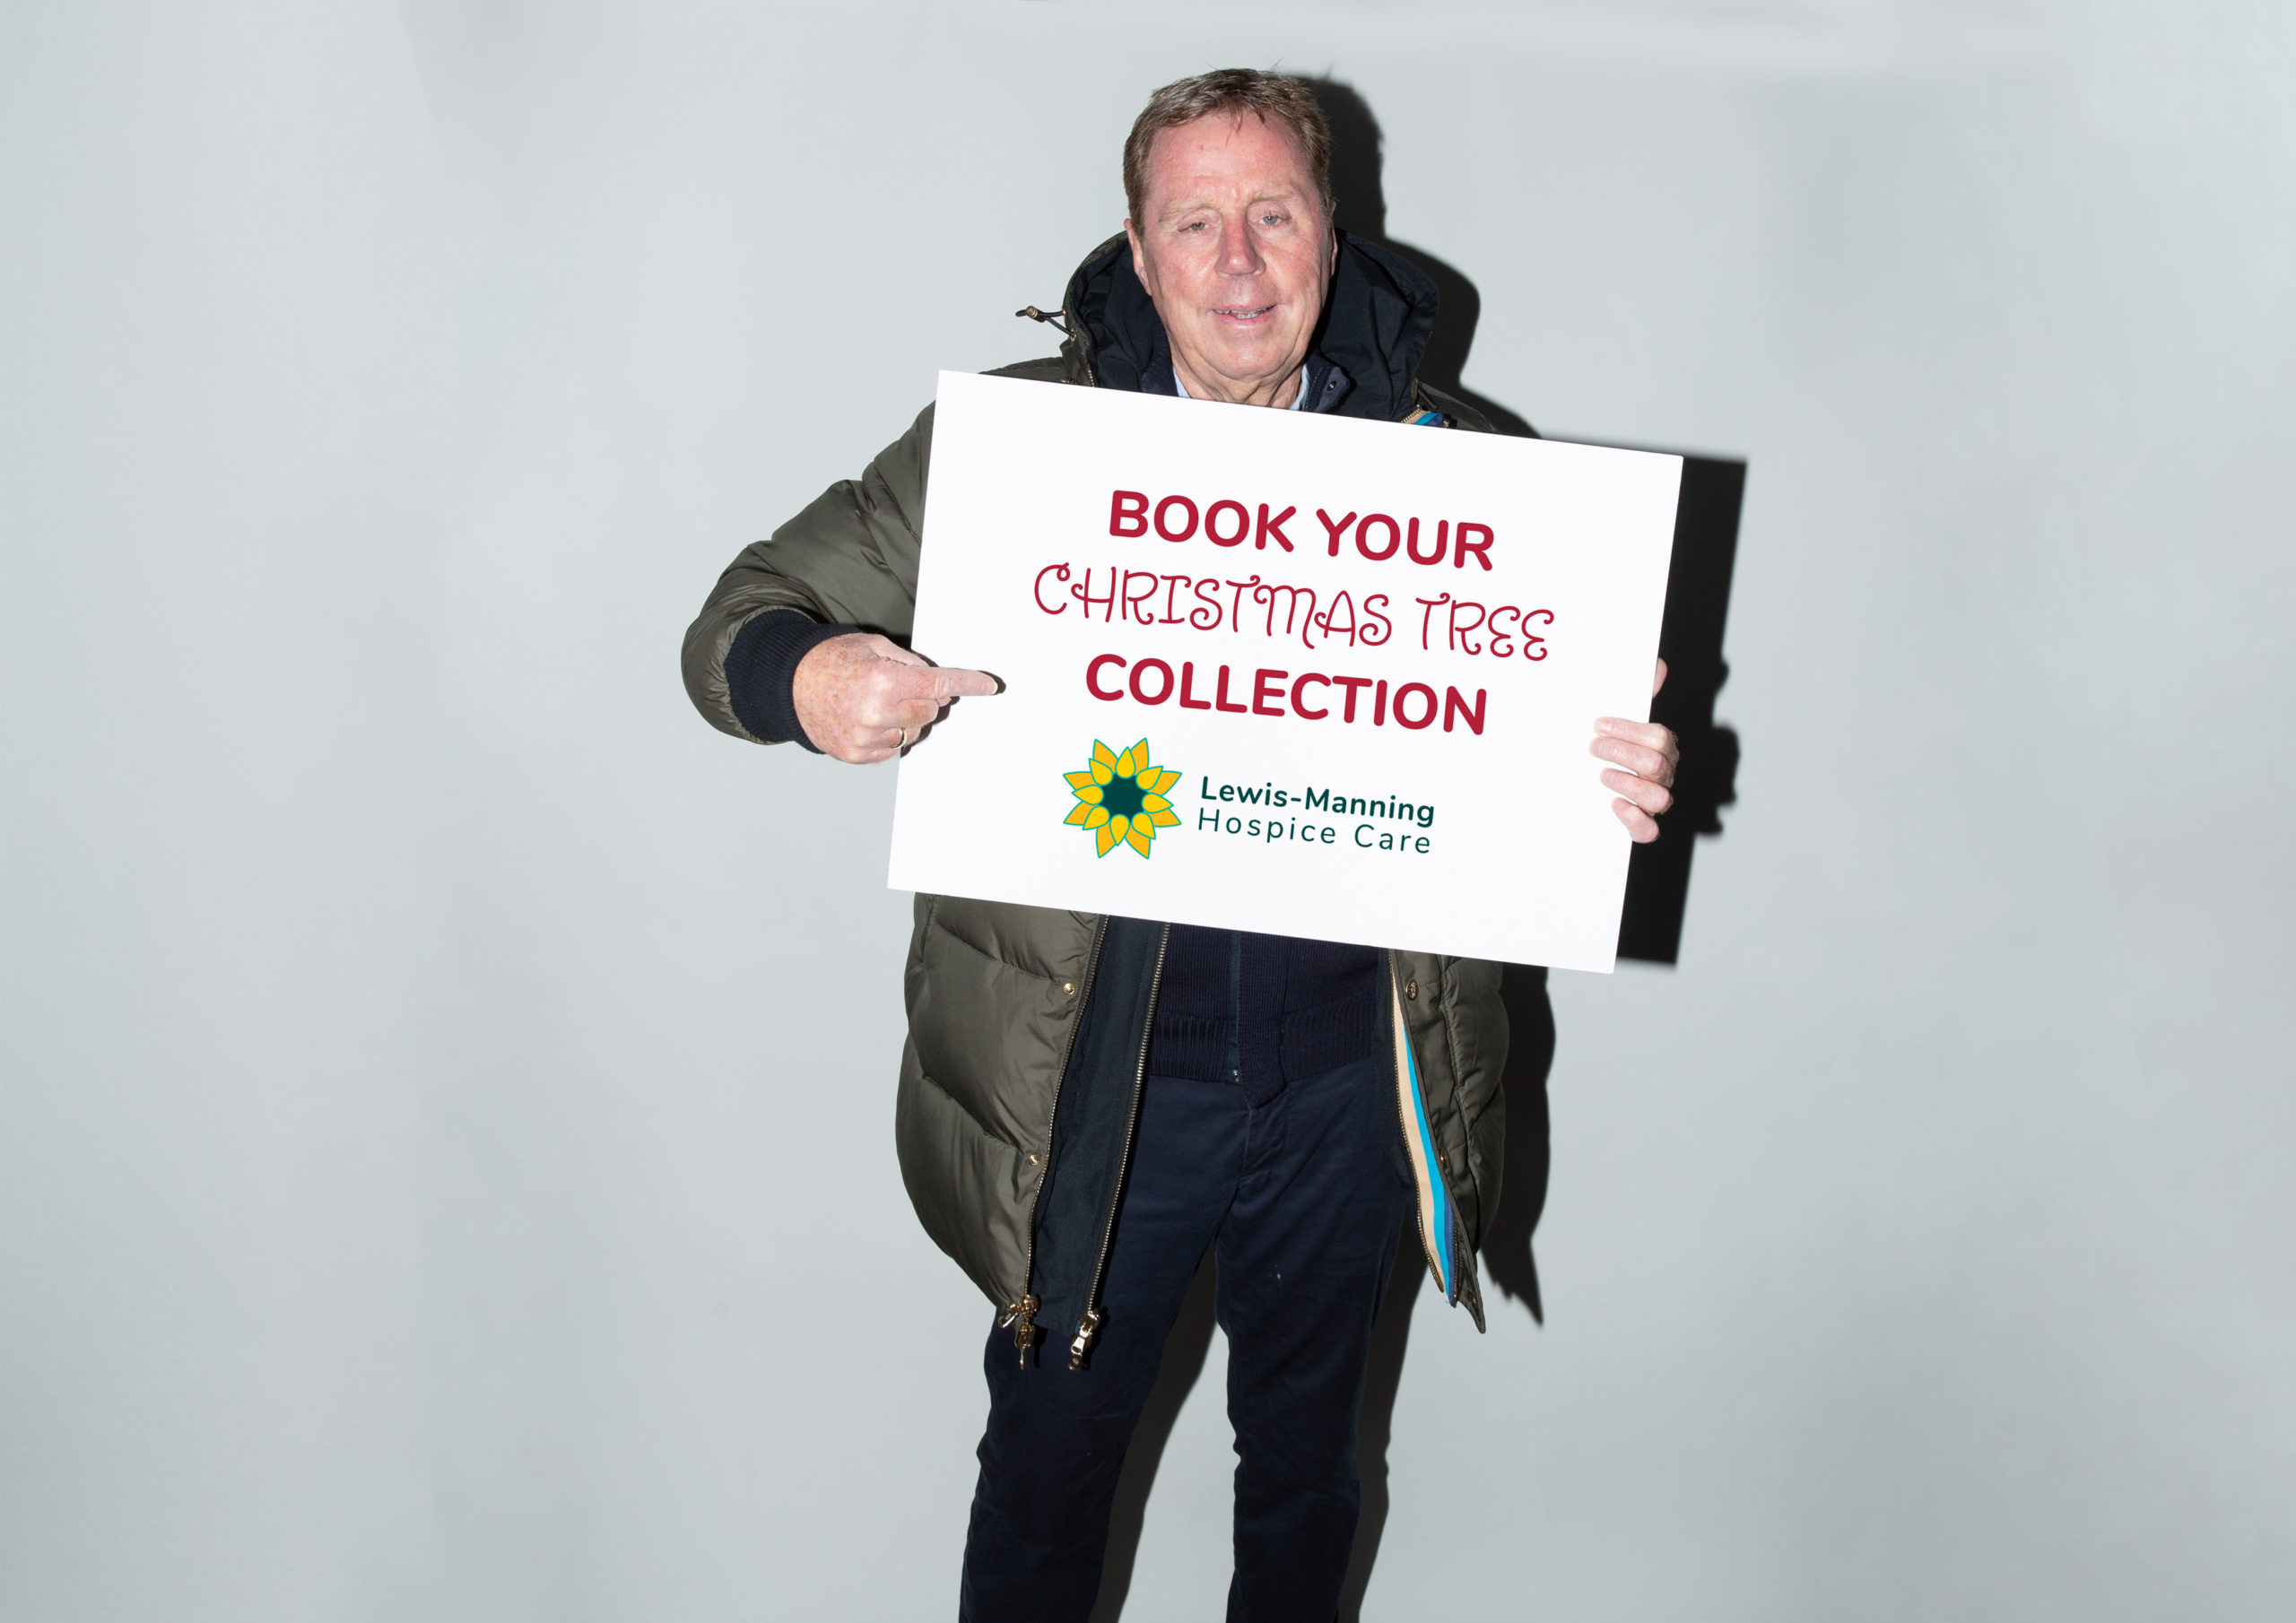 Lewis-Manning Hospice Care’s Christmas tree collection and recycling service is back by popular demand and has been given the big thumbs up from Patron, Harry Redknapp